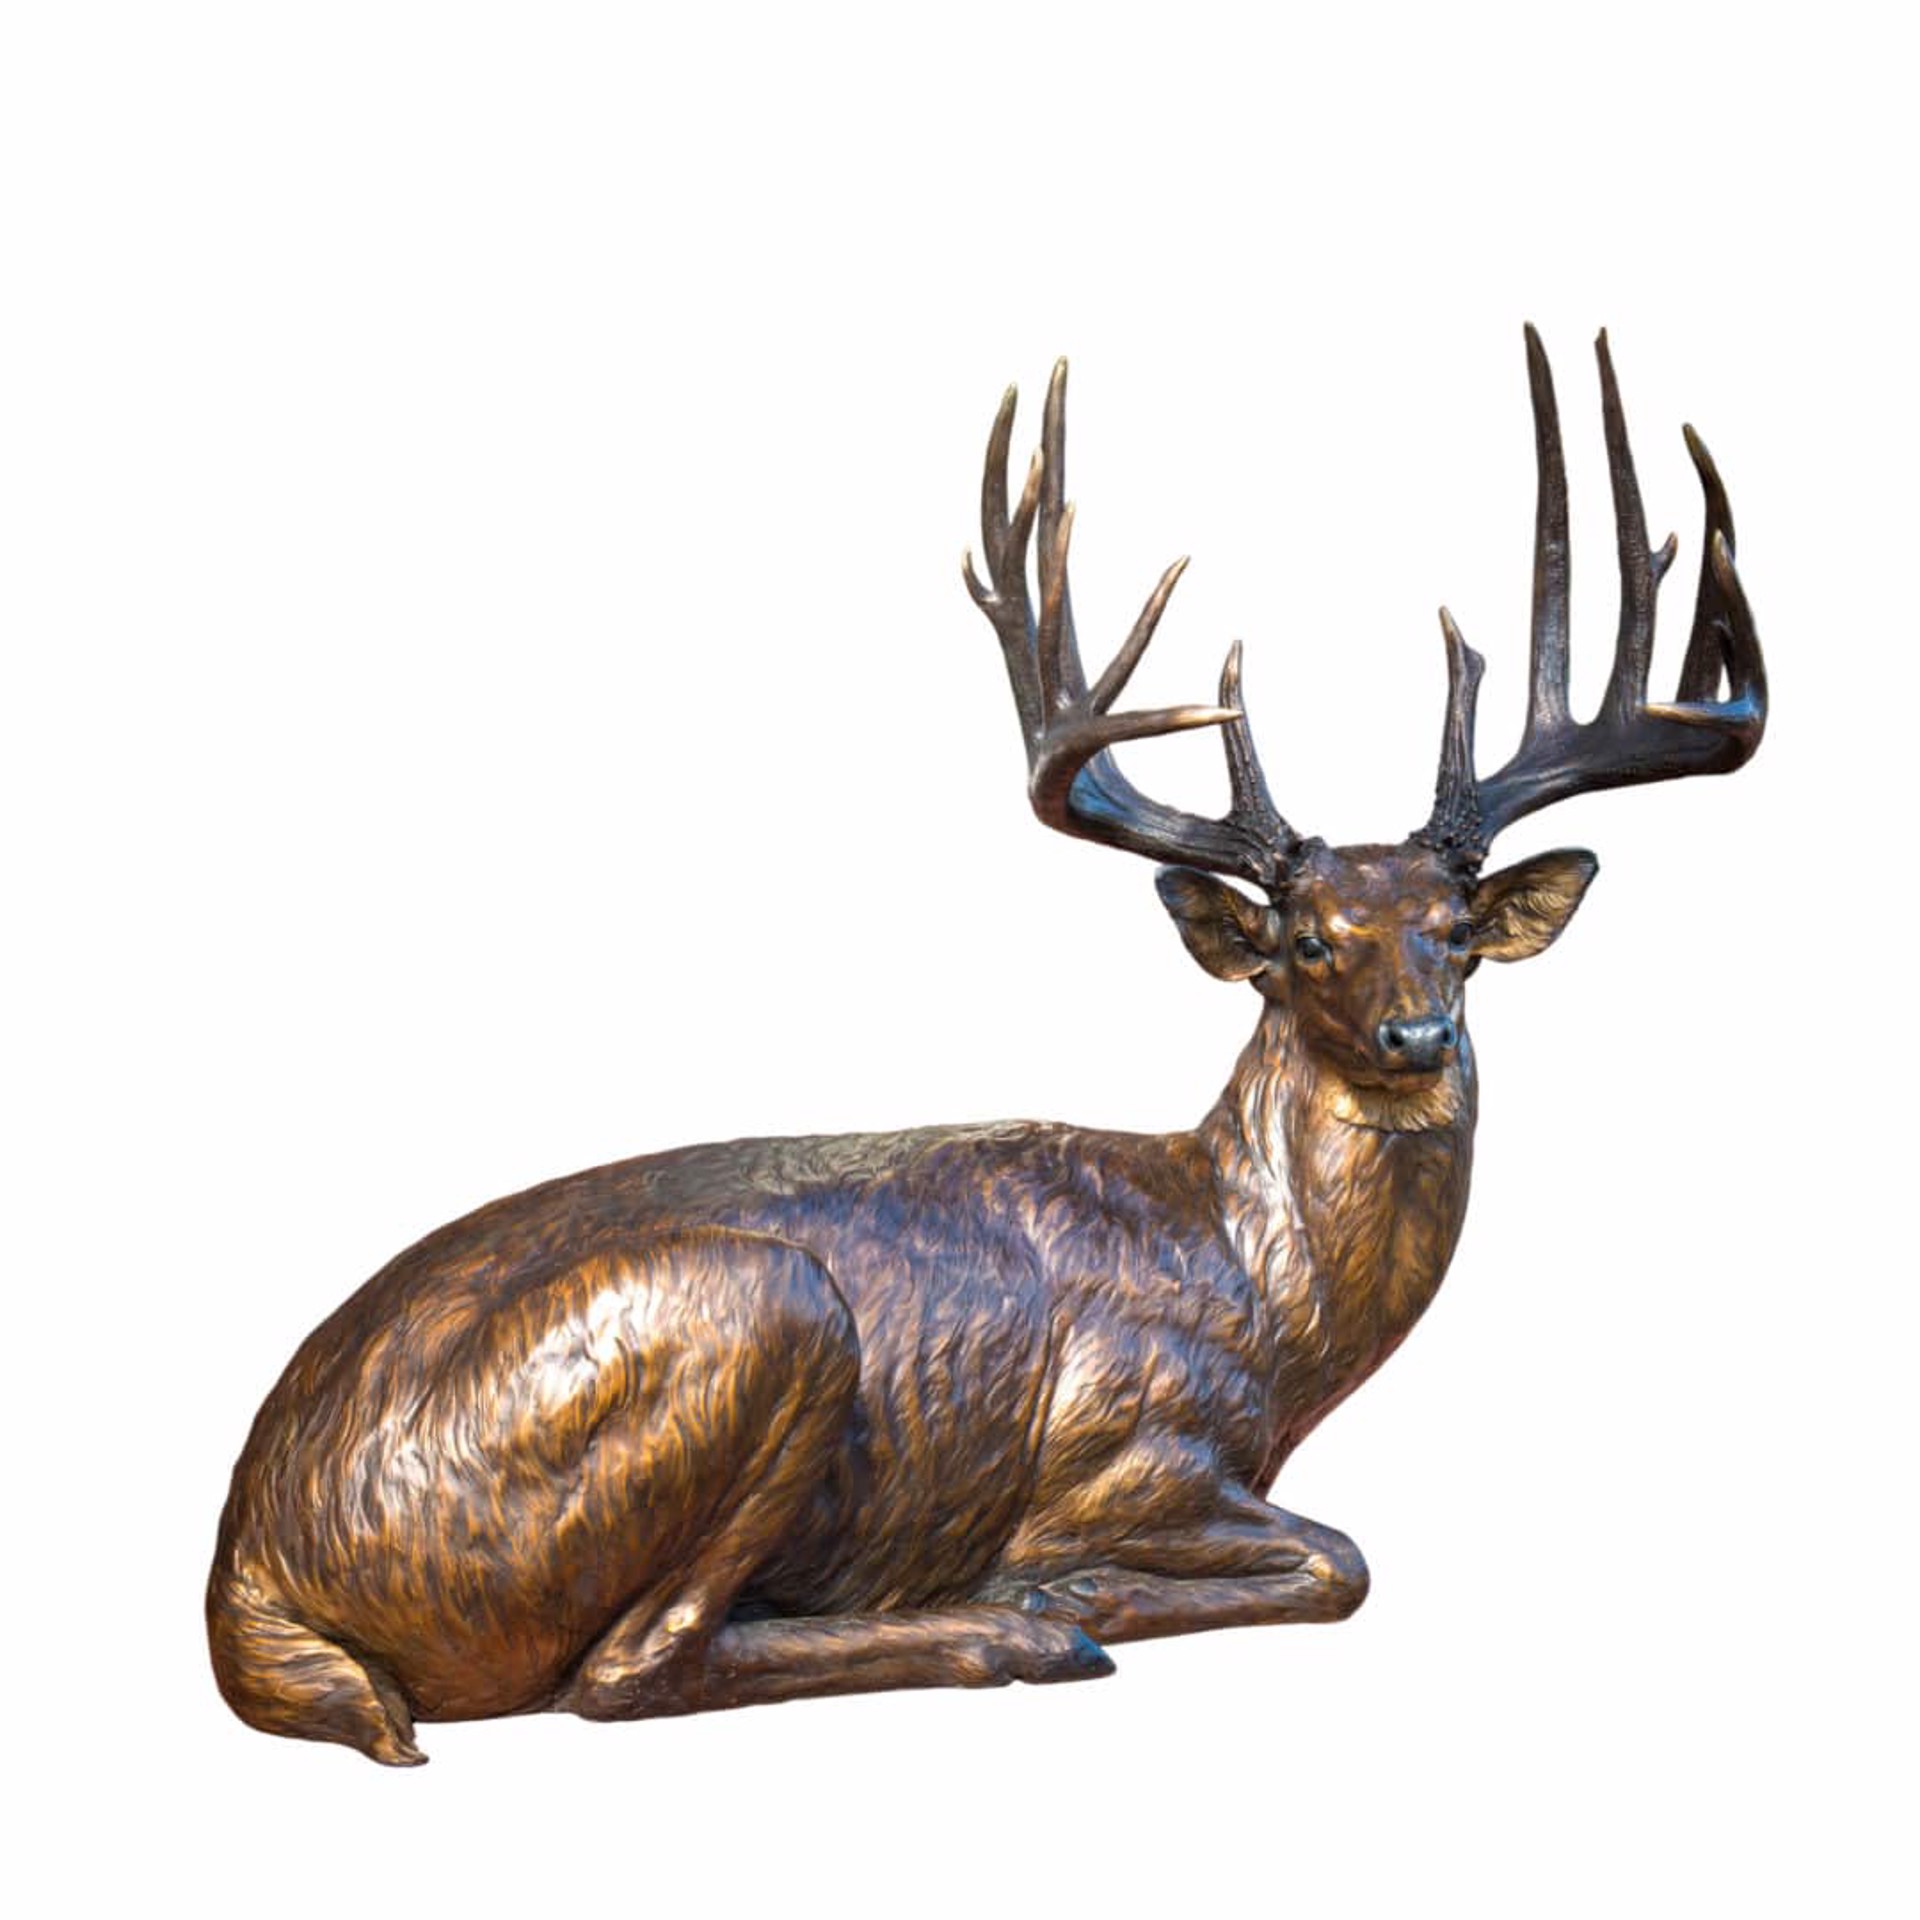 Life Size Whitetail Deer Original Bronze Sculpture by Rip and Alison Caswell, Contemporary Fine Art, Modern Wildlife Art, Available At Gallery Wild